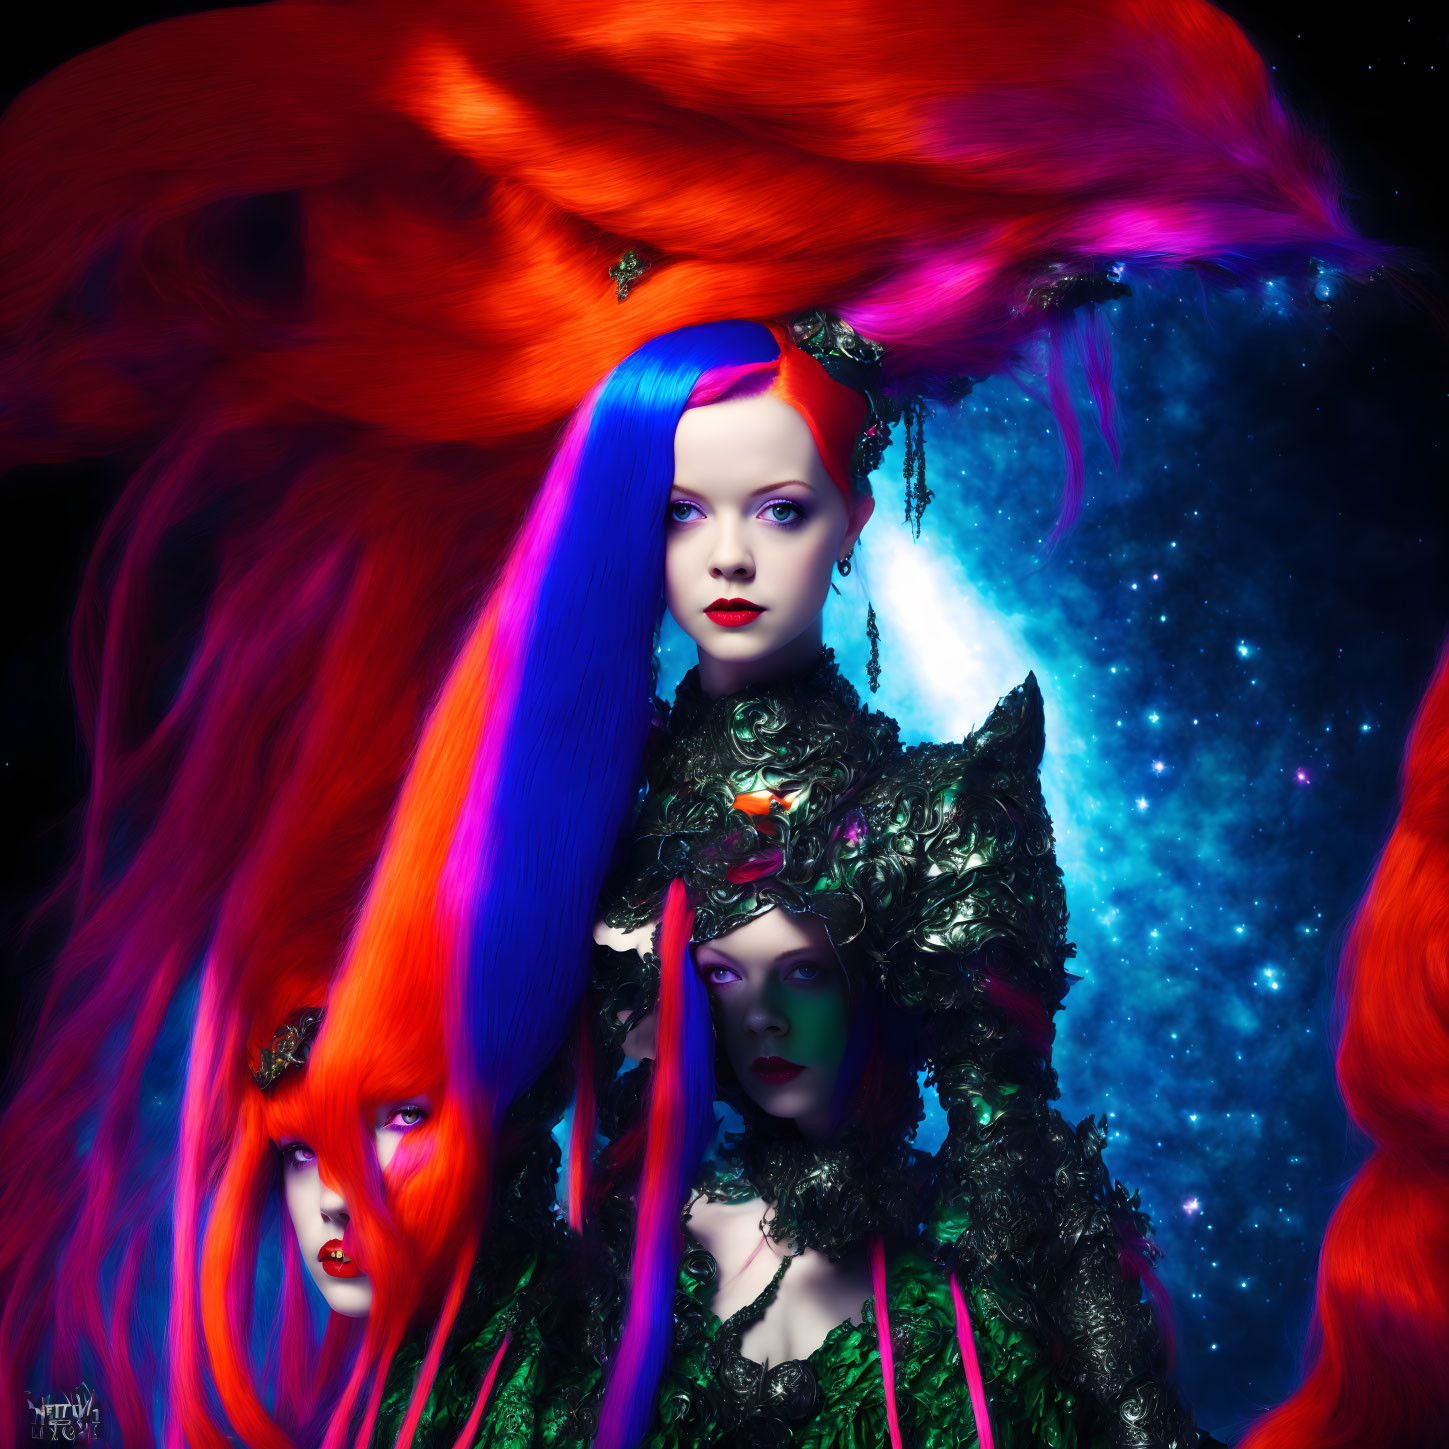 Vibrant surreal portrait of three women with flowing red and blue hair in cosmic setting.